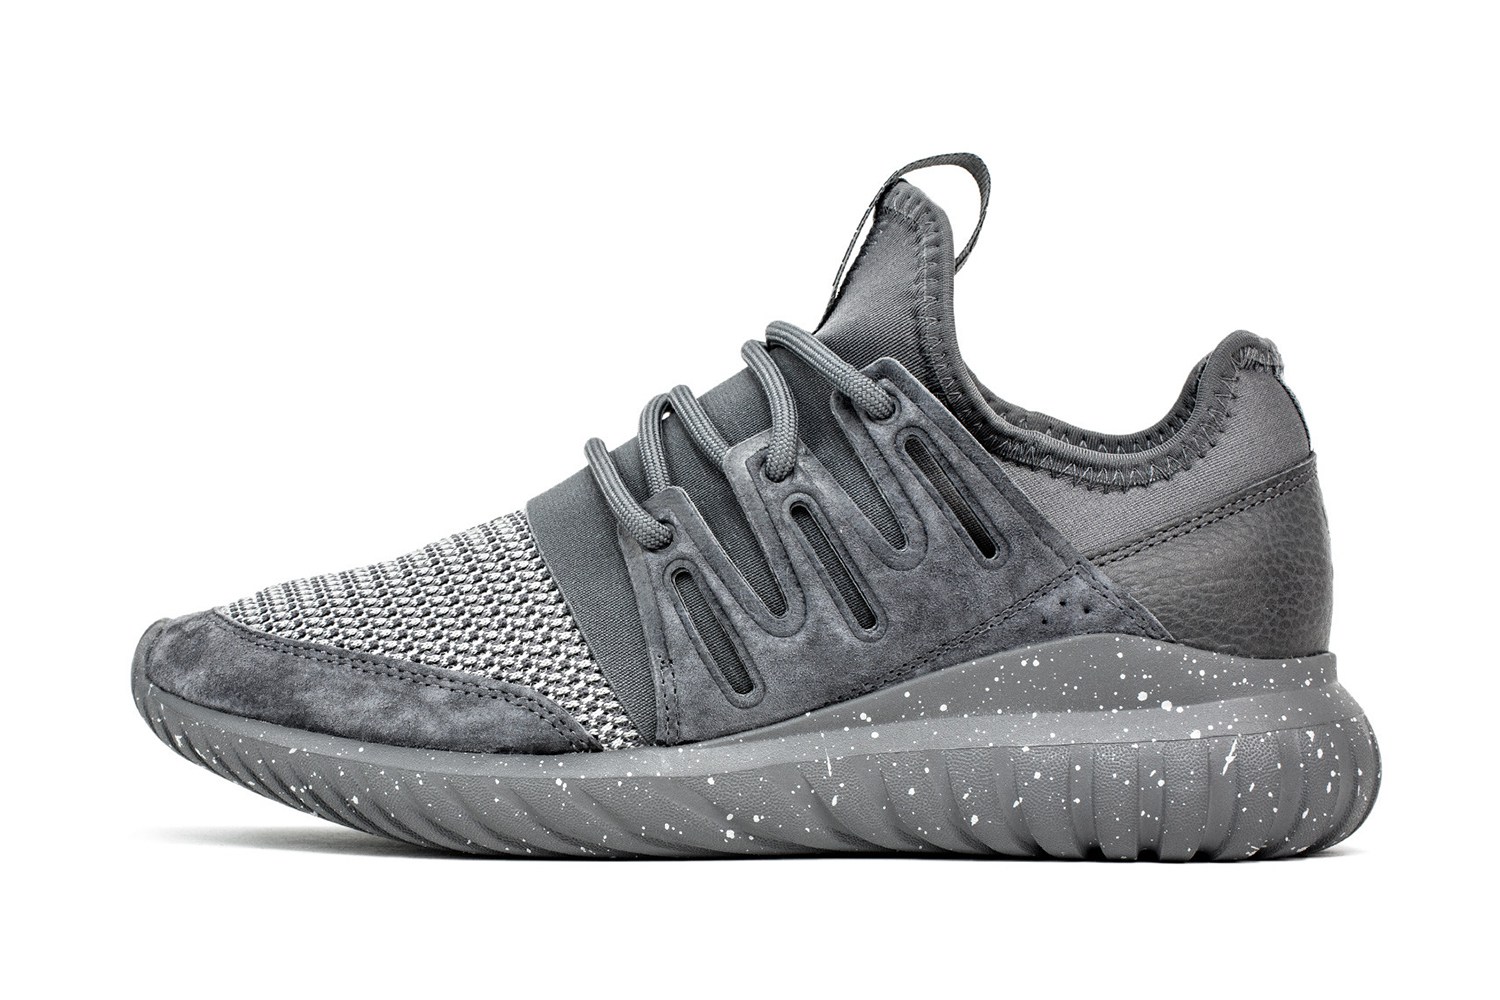 The Adidas Tubular Radial With Some Spots On It Planet Of The Sanquon